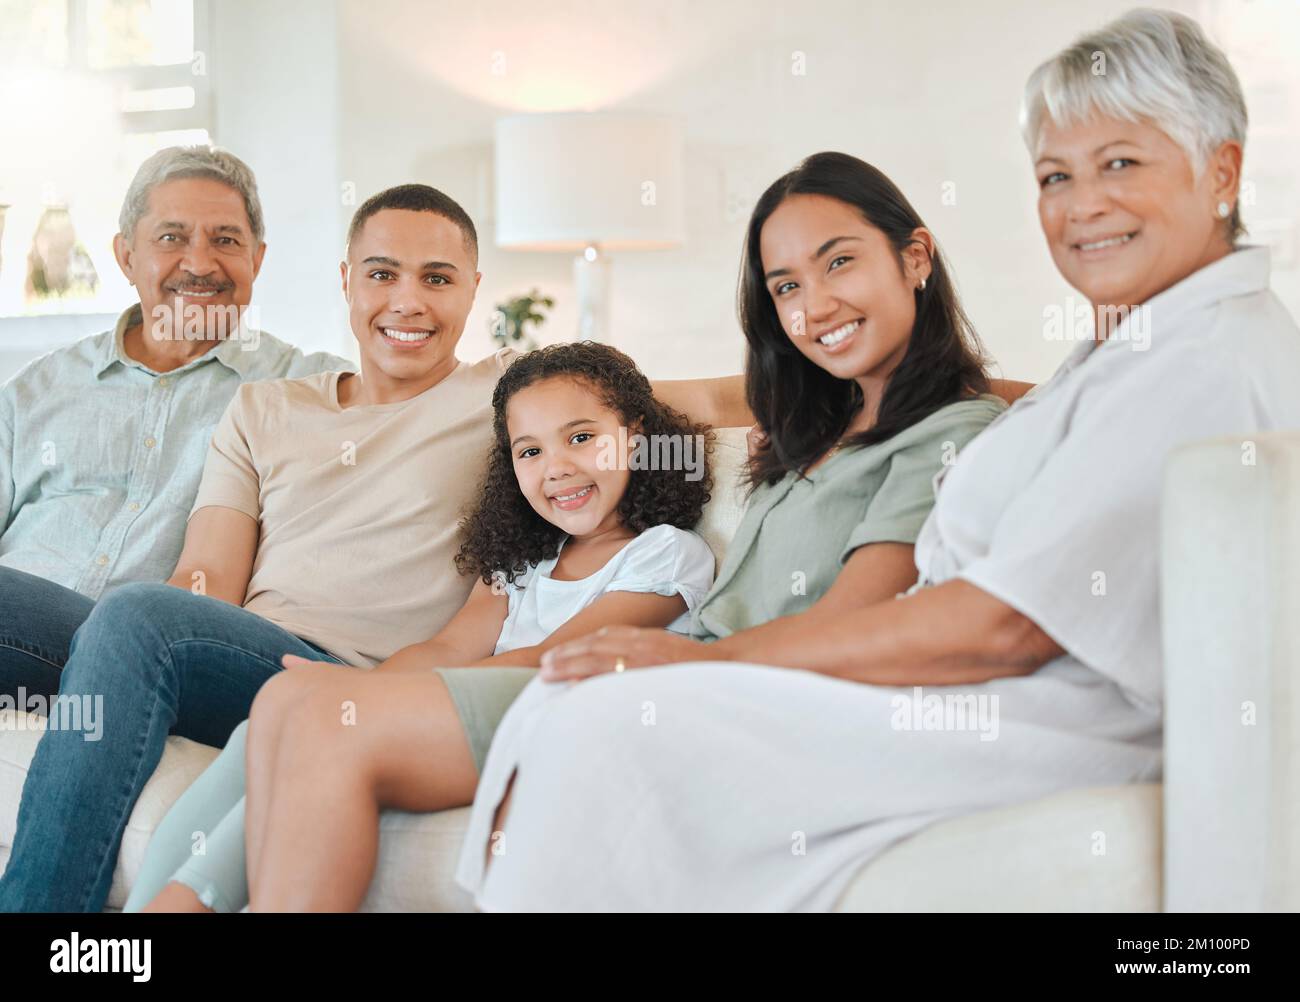 Its always hard leaving here. a beautiful family bonding on a sofa at home. Stock Photo